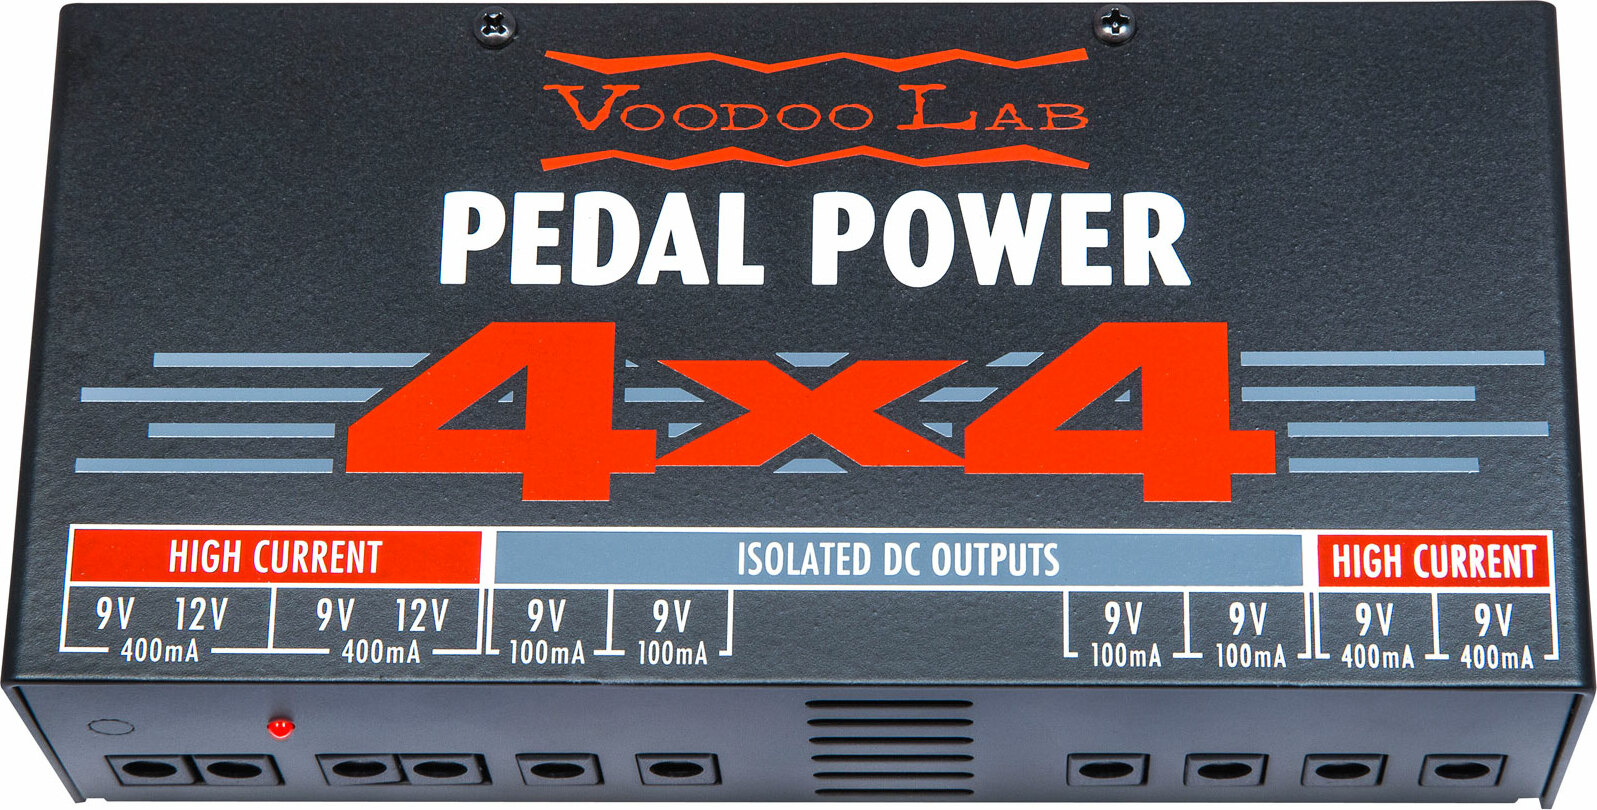 Voodoo Lab Pedal Power 4x4 - Power supply - Main picture